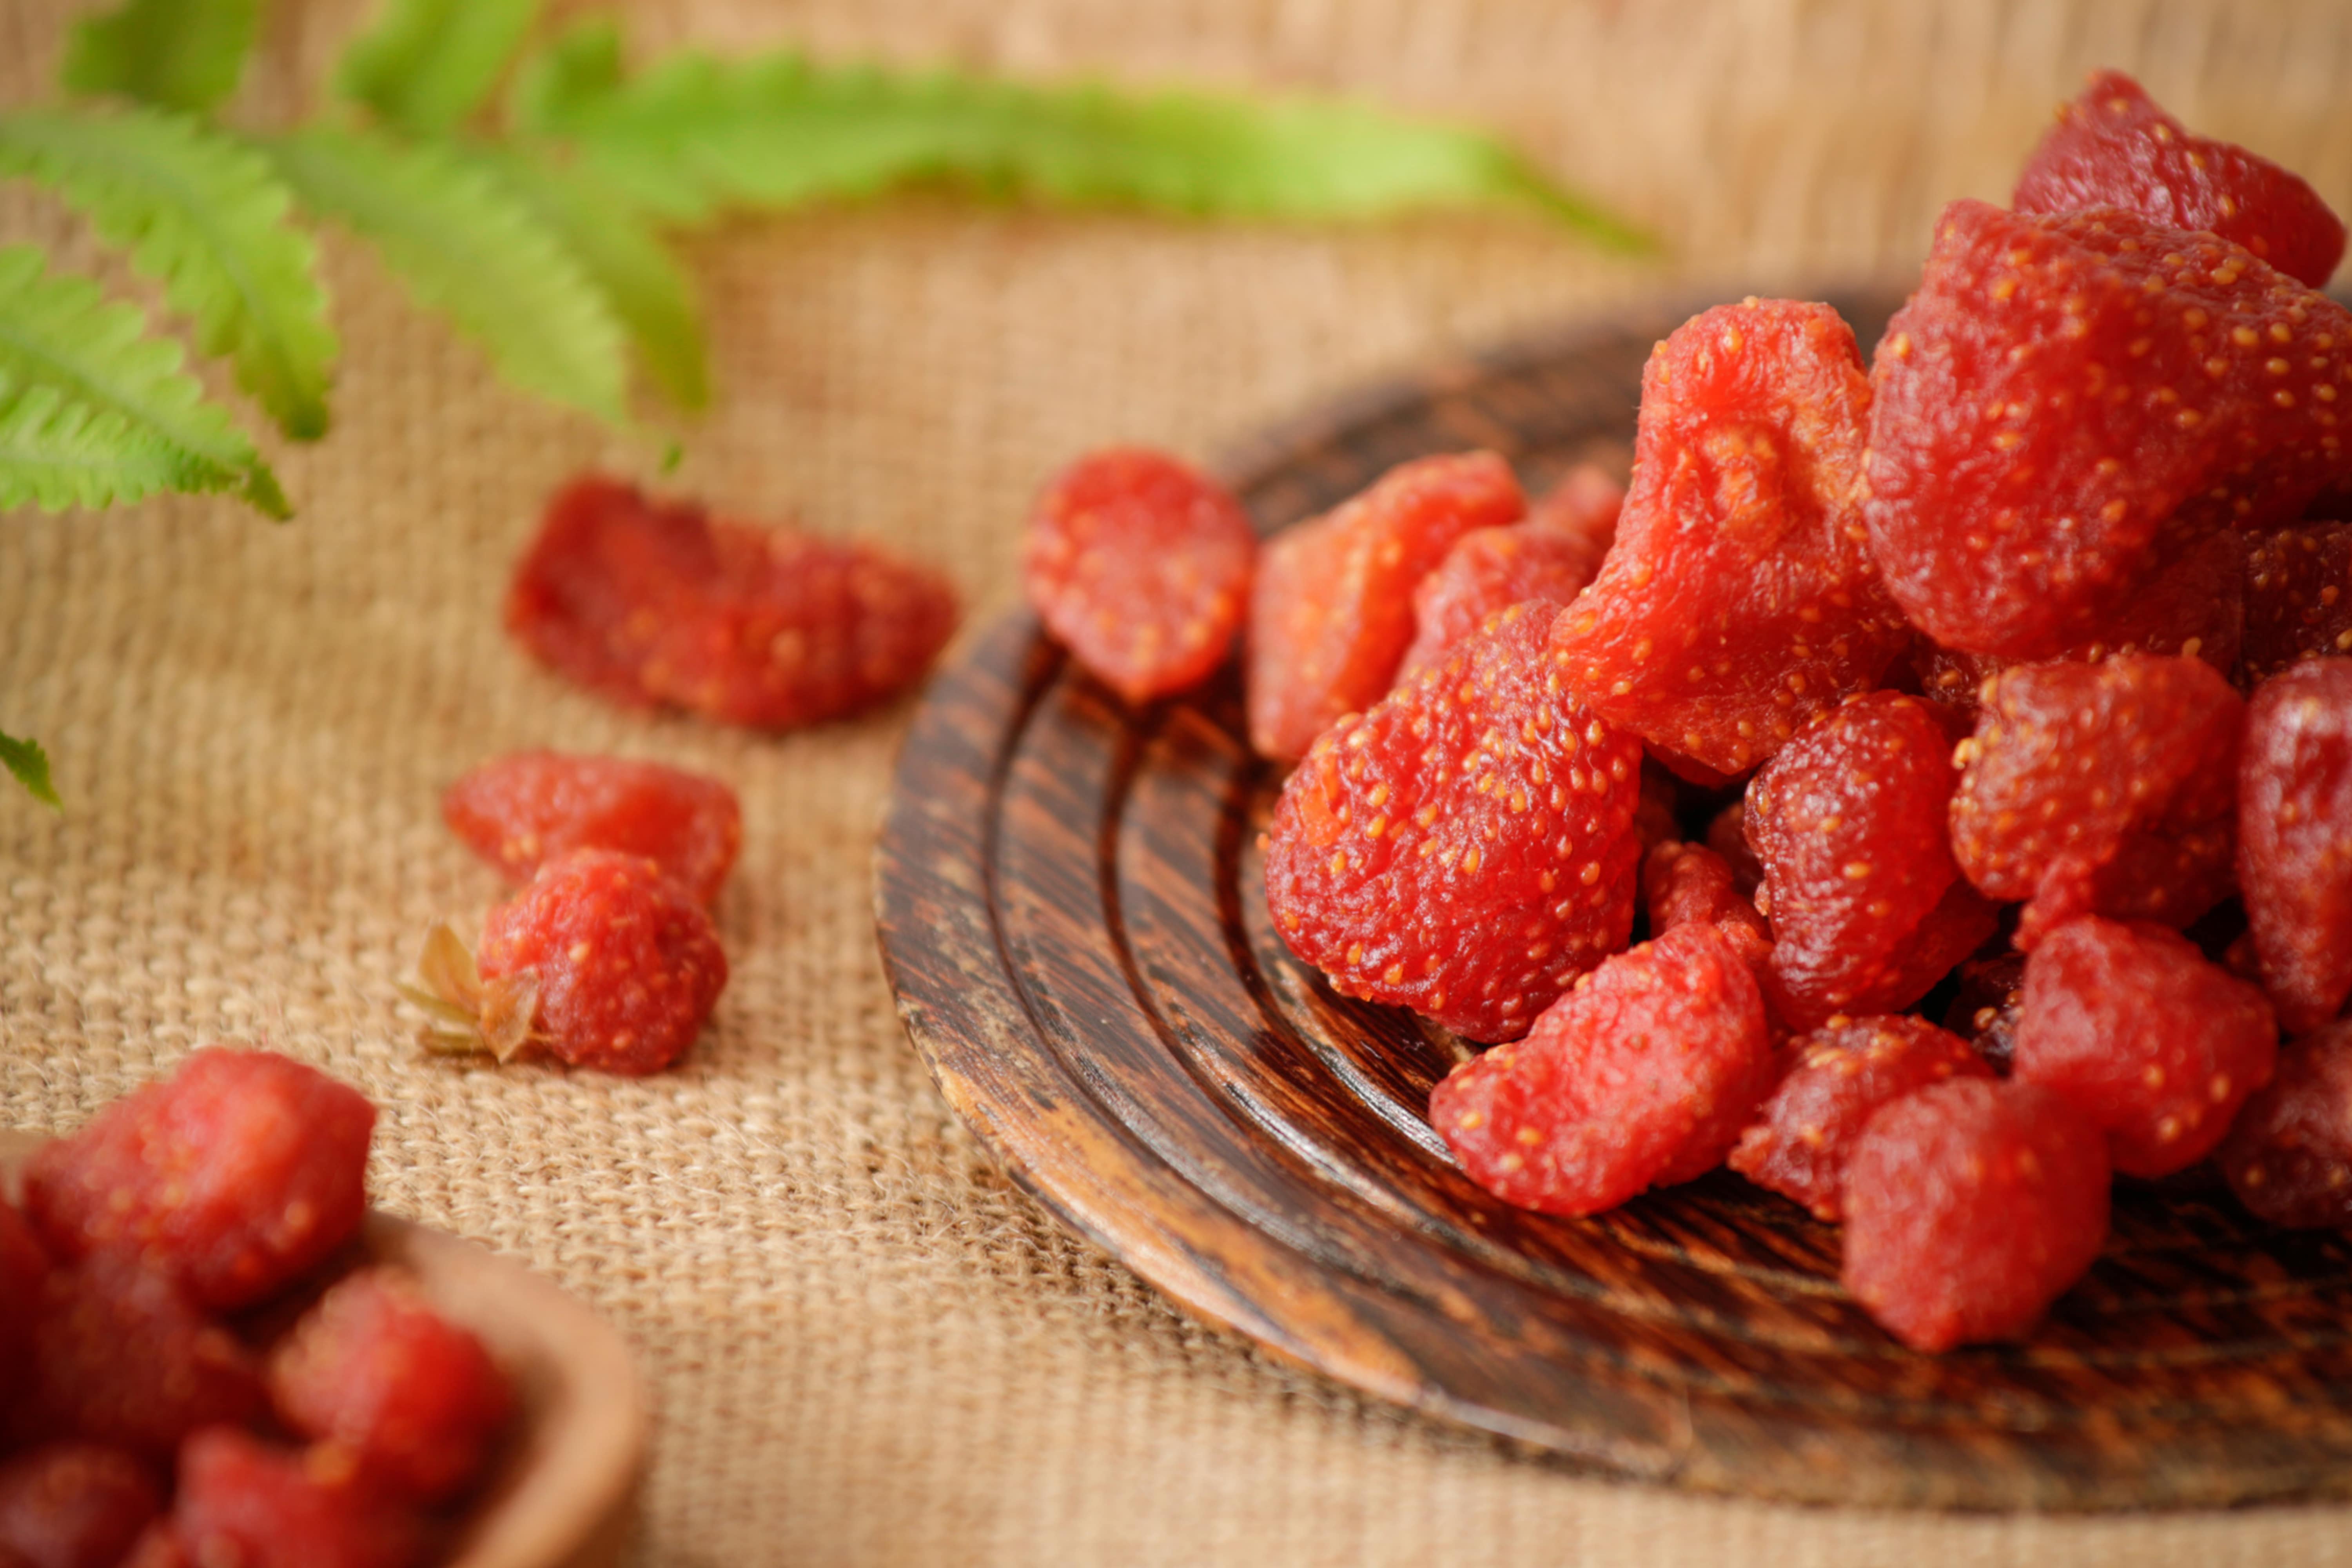 How to Make Freeze Dried Strawberries